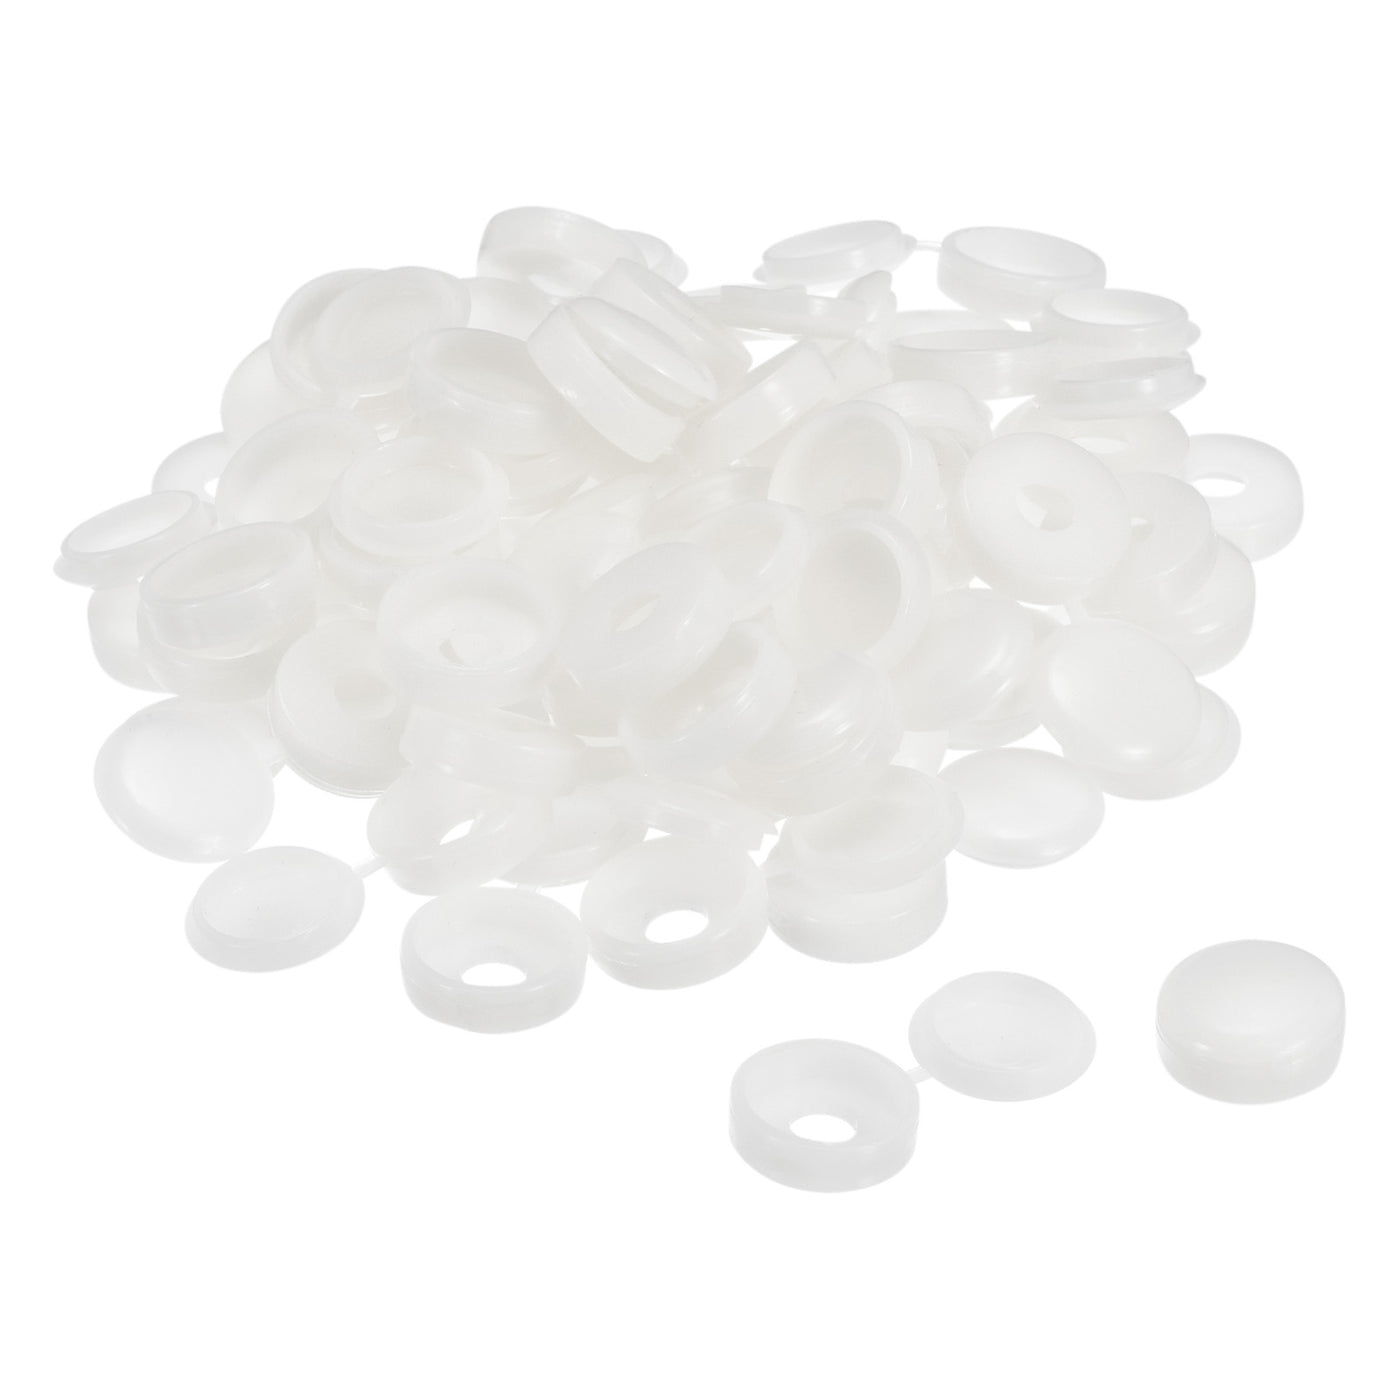 uxcell Uxcell 200Pcs 6mm Hinged Screw Cover Caps Plastic Fold Screw Snap Covers, White